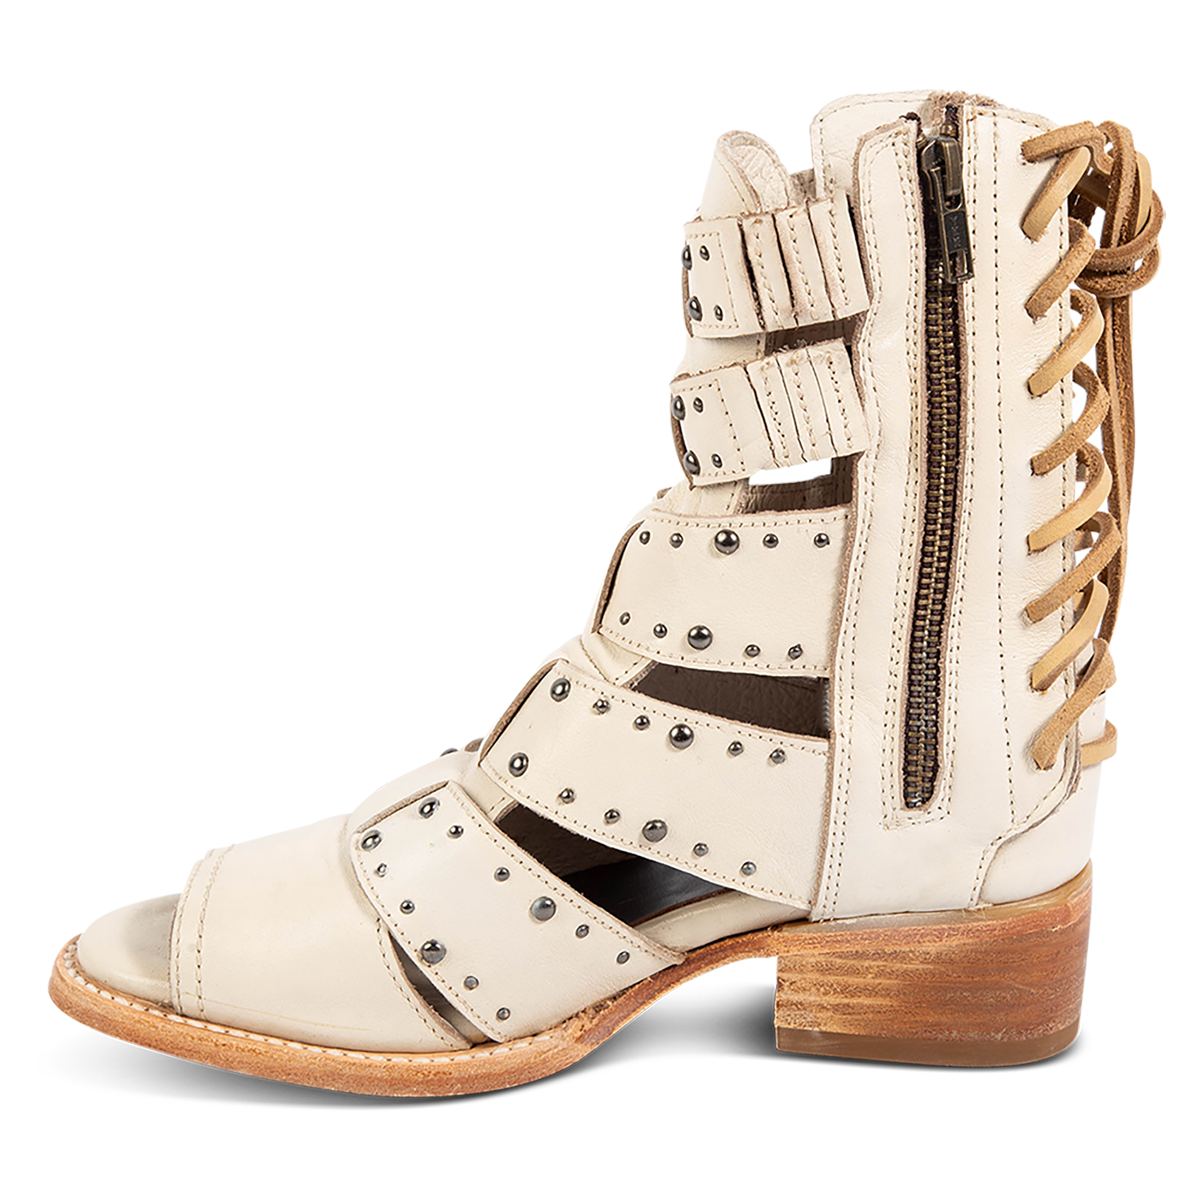 Inside view showing FREEBIRD women's Ghost off white leather sandal with an inside working brass zipper, back panel lacing and an exposed exterior